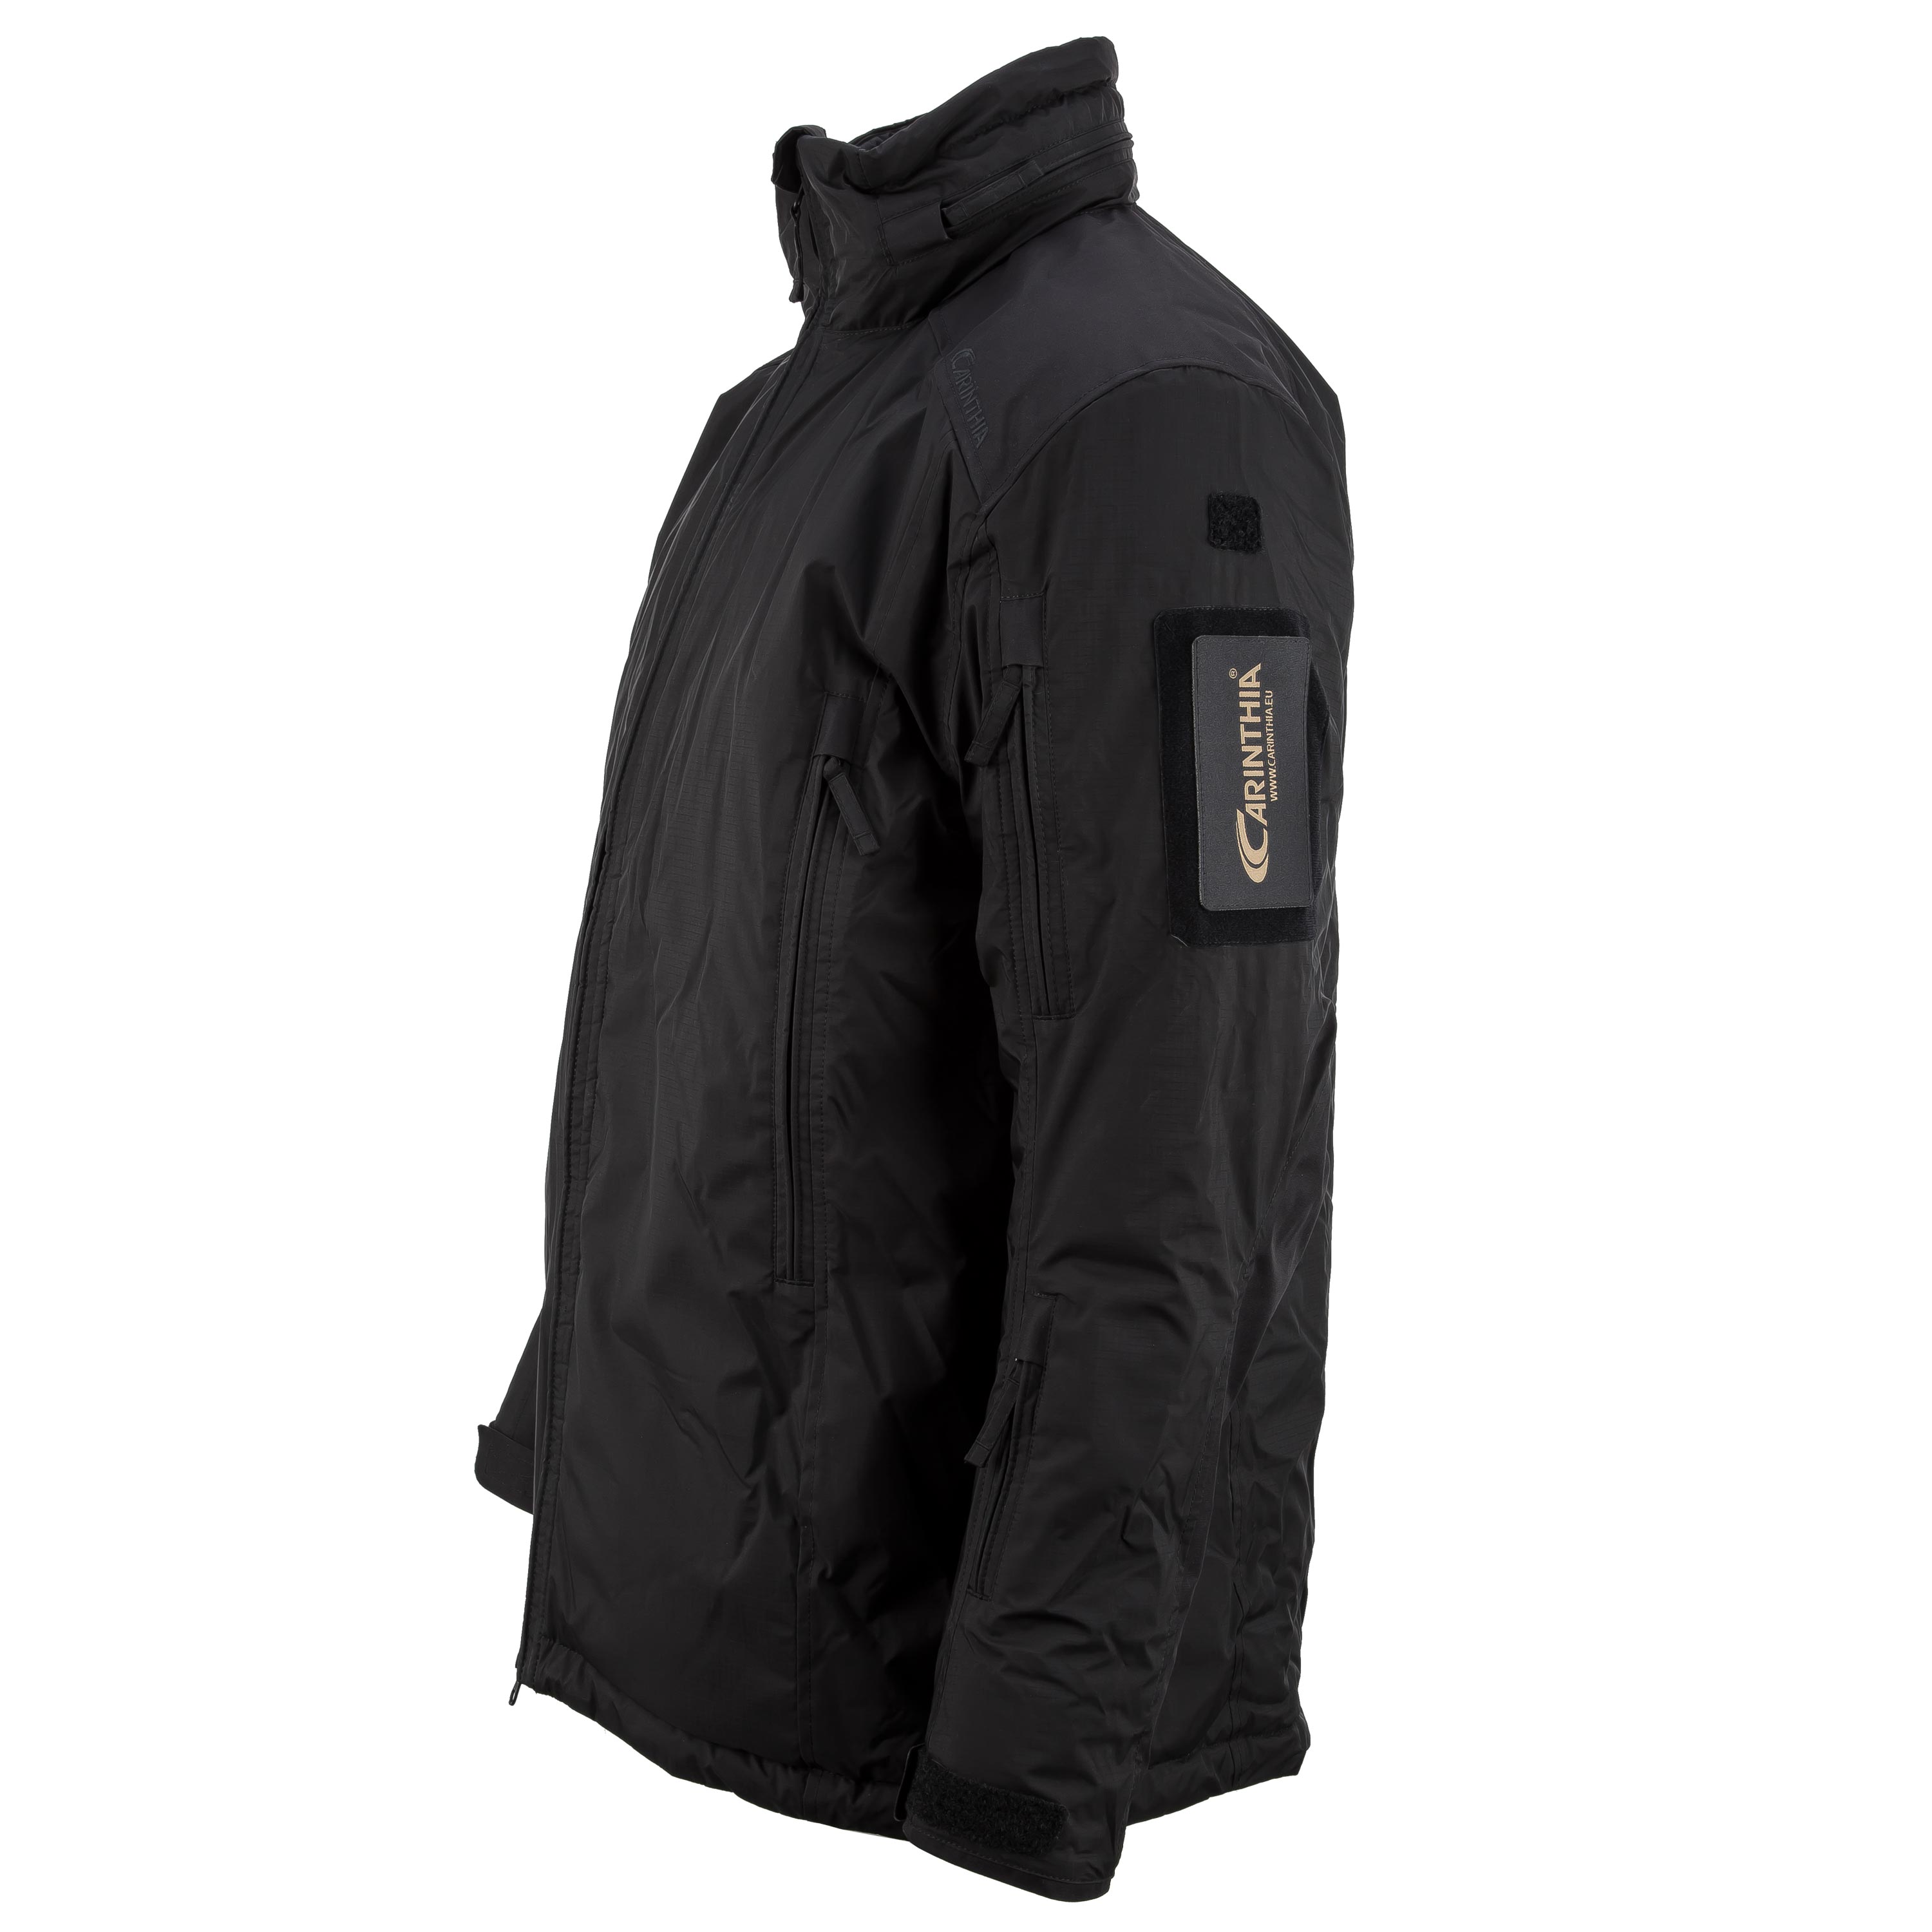 Purchase the Carinthia Jacket HIG 4.0 black by ASMC